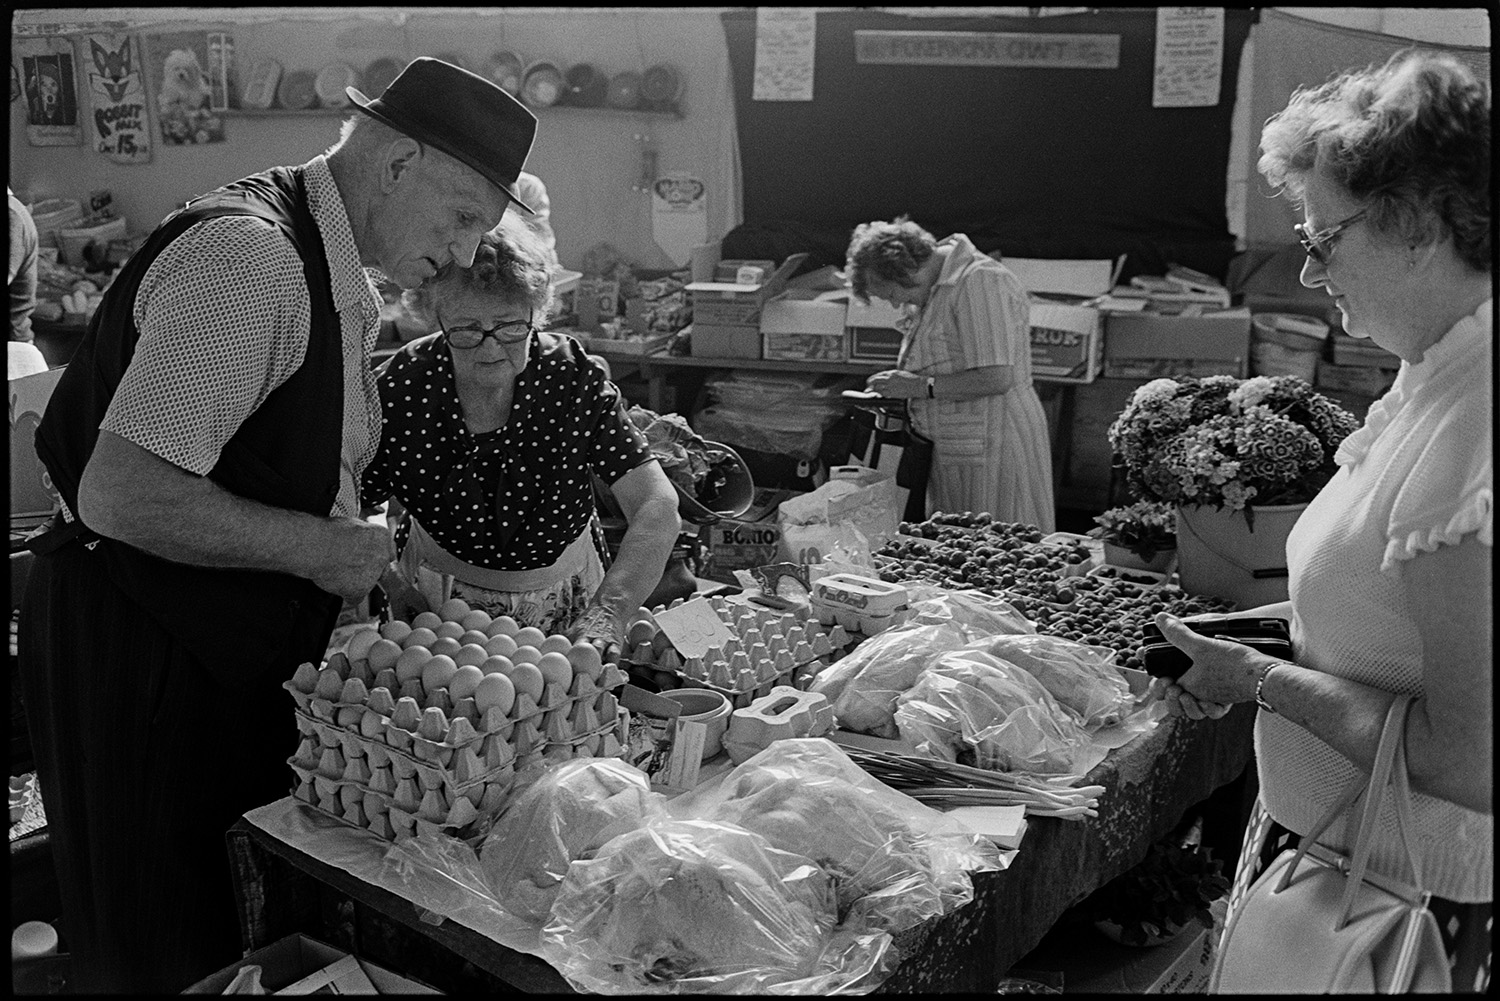 Pannier market stalls, cheese eggs, vegetables, customers. 
[A woman buying eggs from a man and woman running a stall at Bideford Pannier Market. Poultry, punnets of fruit and flowers are also for sale on the stall.]